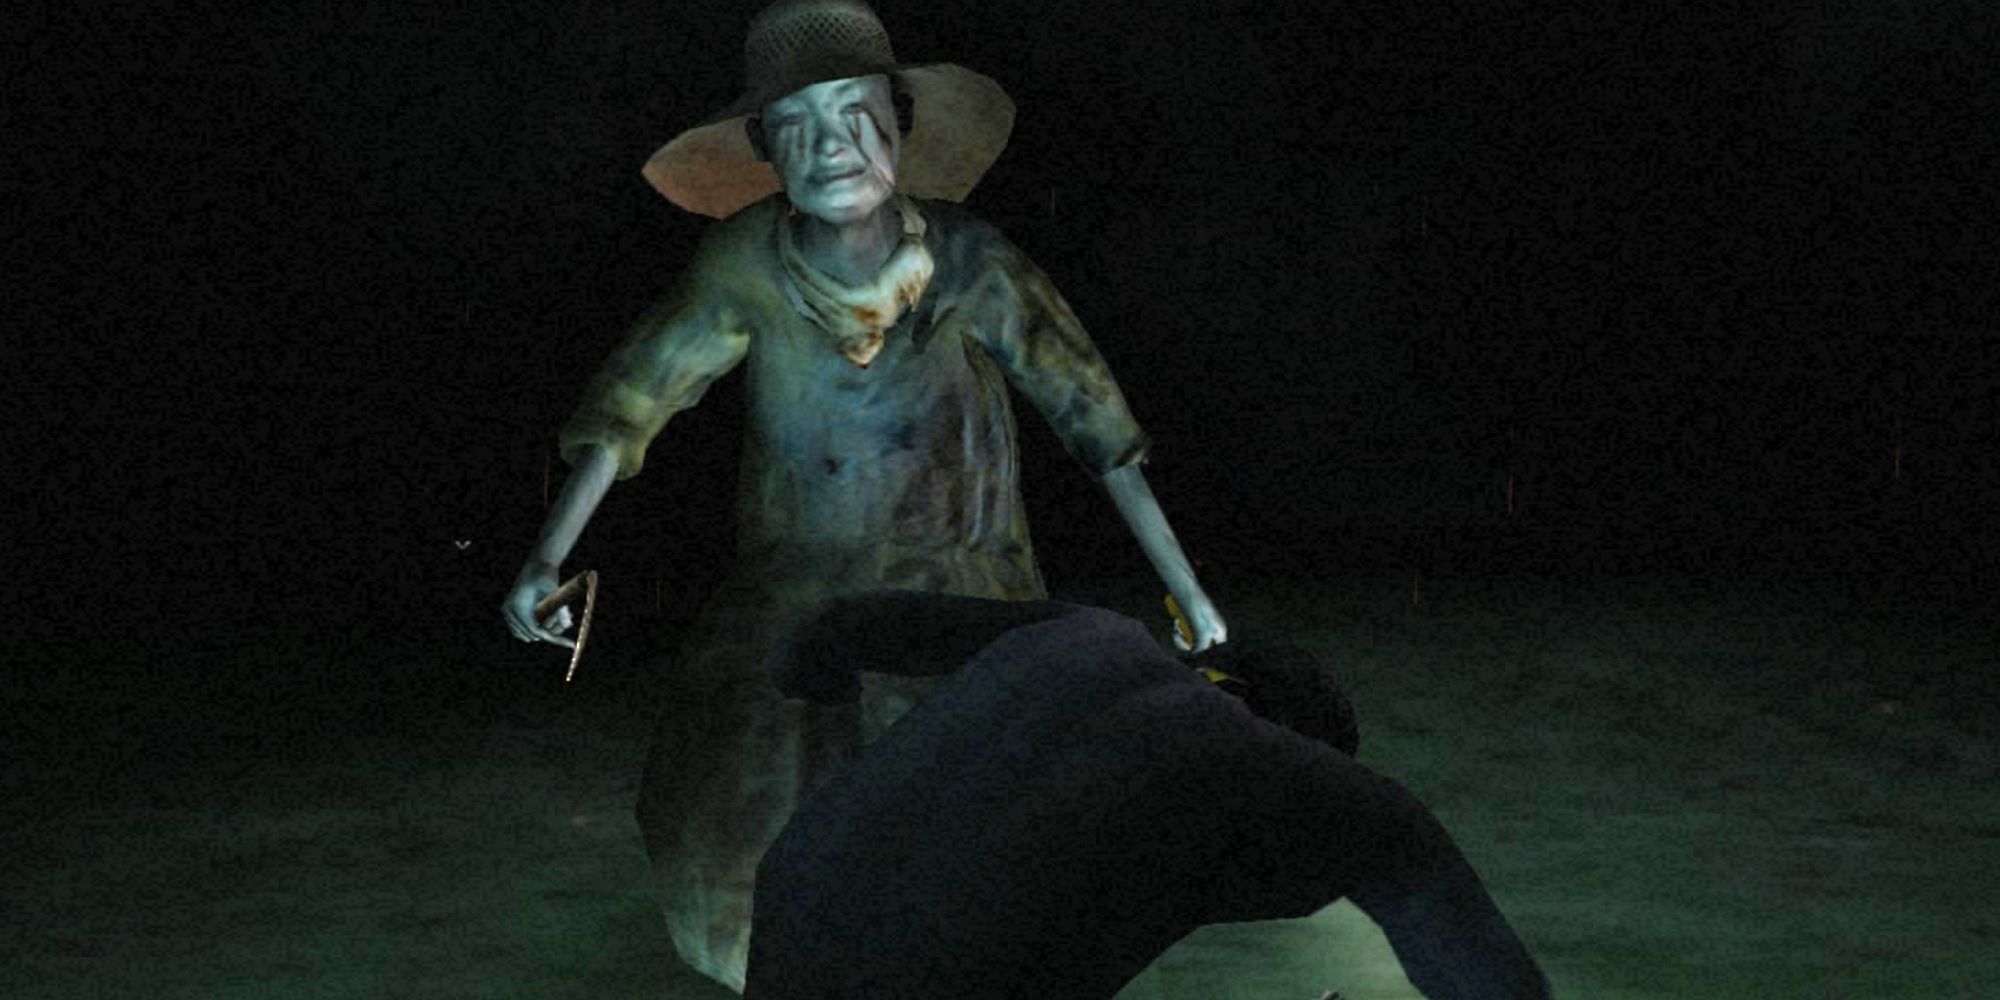 Character being attacked by a ghost in Siren (2003)